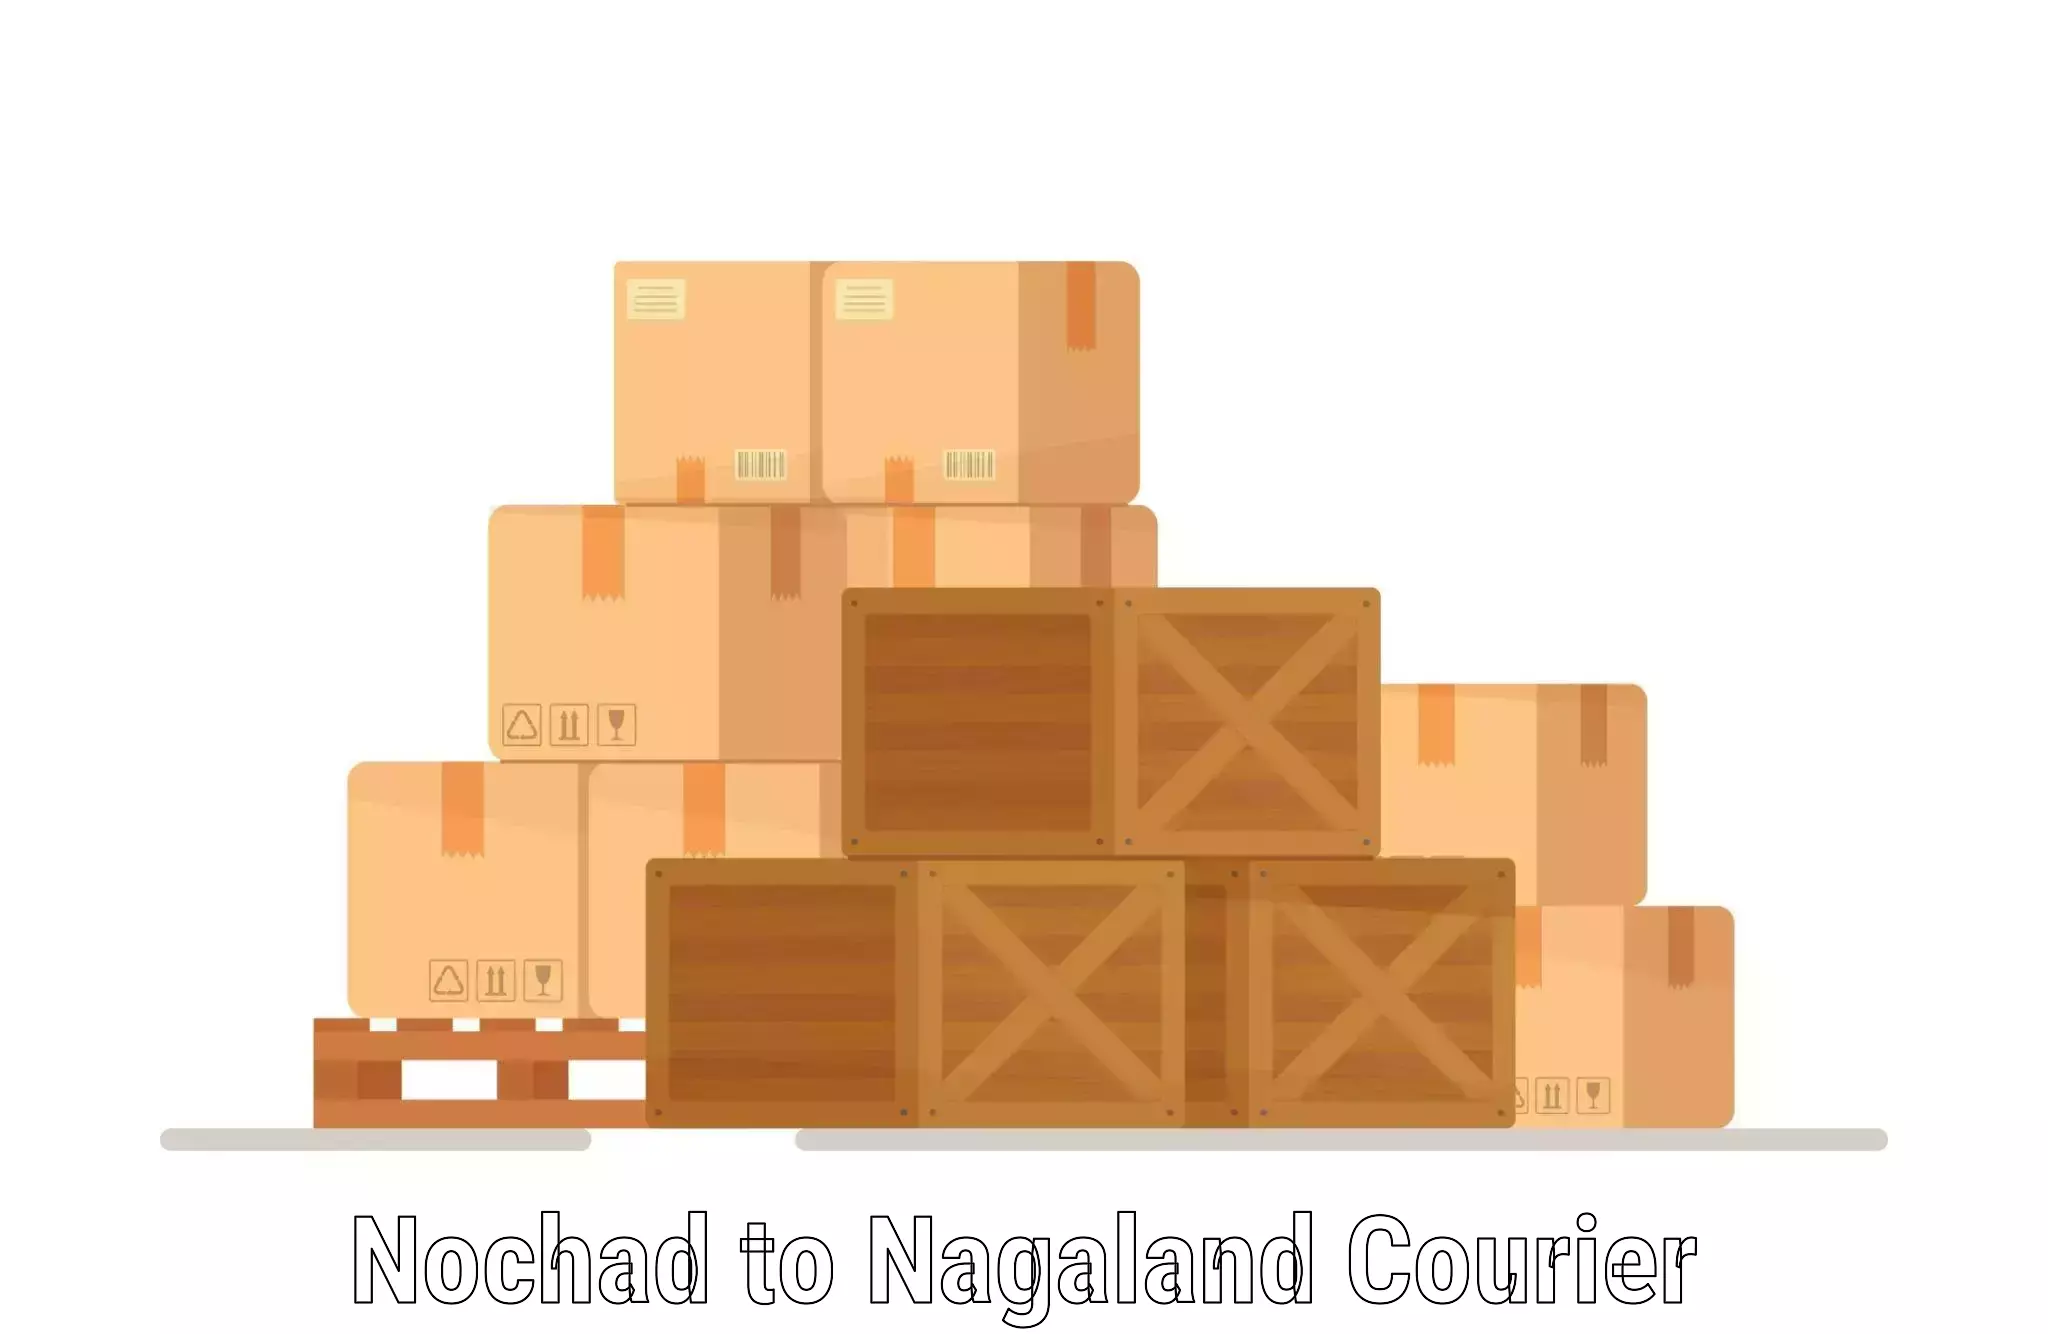 High-speed delivery Nochad to Nagaland